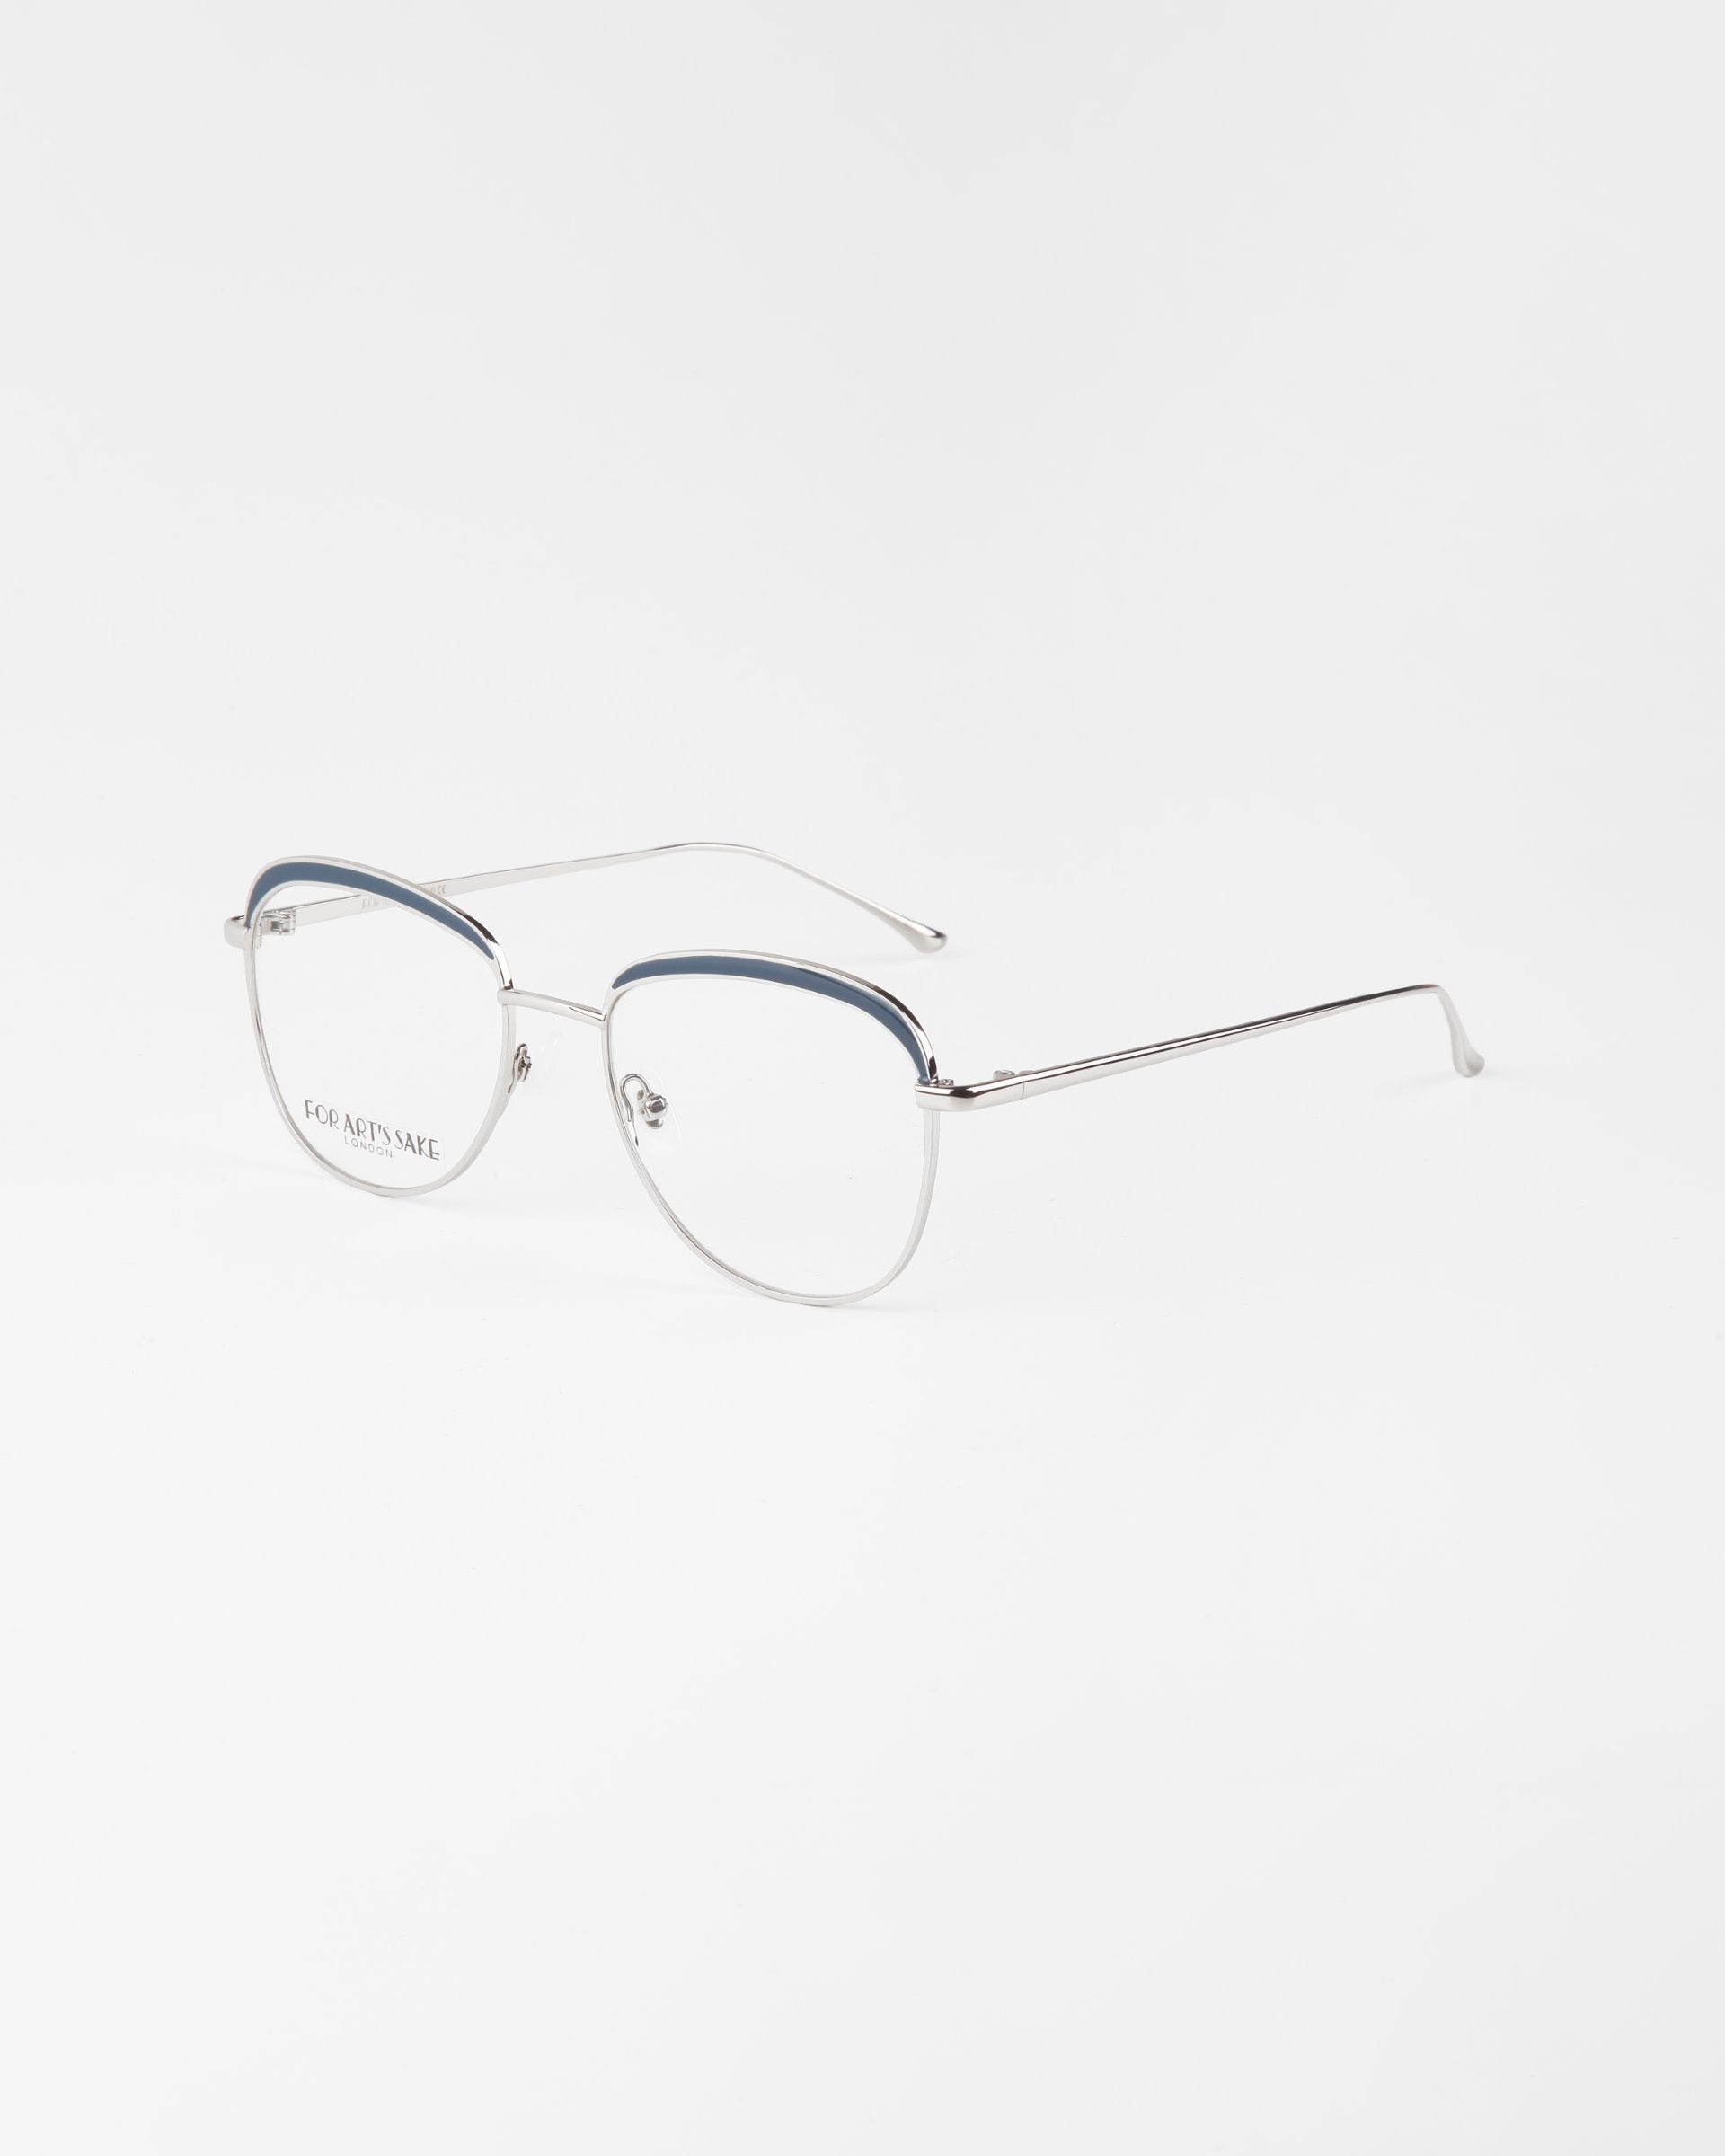 A pair of stylish, metal-rimmed eyeglasses called Smoothie from For Art's Sake® with a thin, silver frame and transparent lenses. The upper part of the rims is accented with a blue detail and includes a blue light filter. The glasses are positioned at an angle on a white surface.